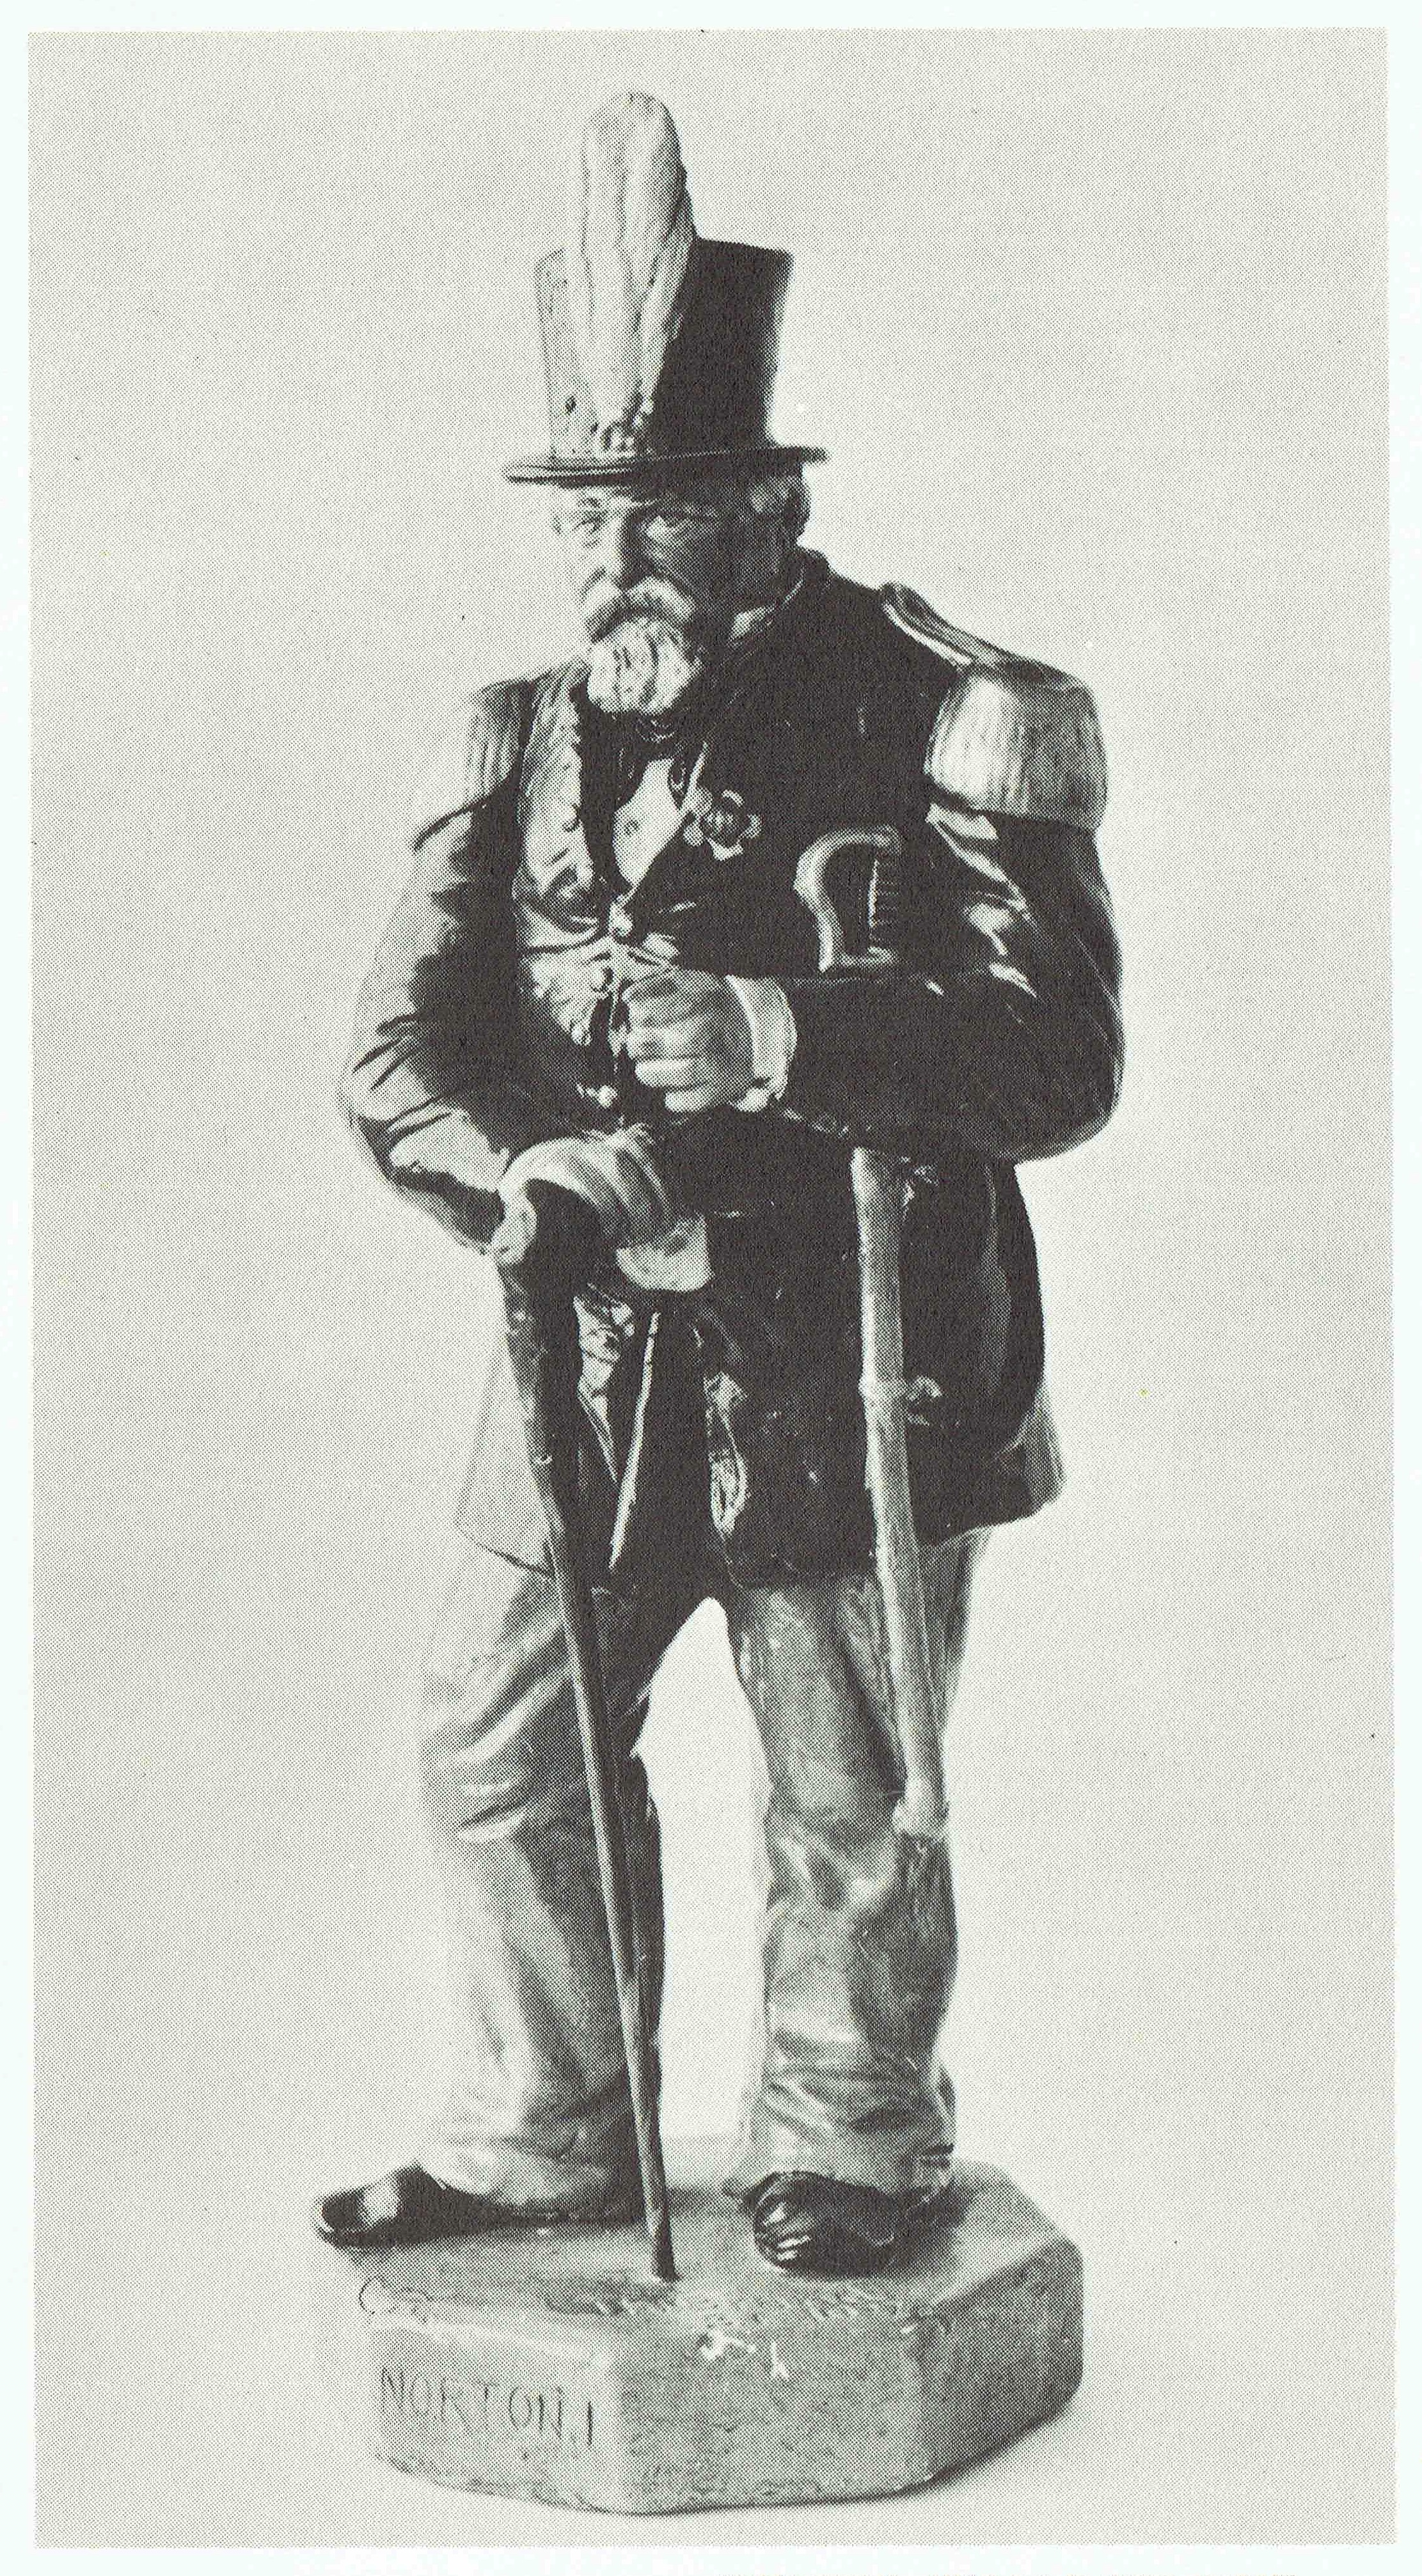   Emperor Norton statuette, 1877, by Herman J. Brand (1837–1914).  Plaster, 22” x 7” x 7”.    Collection of the Wells Fargo HIstory Museum, San Francisco. Source:&nbsp; The Forgotten Characters of Old San Francisco  (The Ward Ritchie Press, 1964). Fo